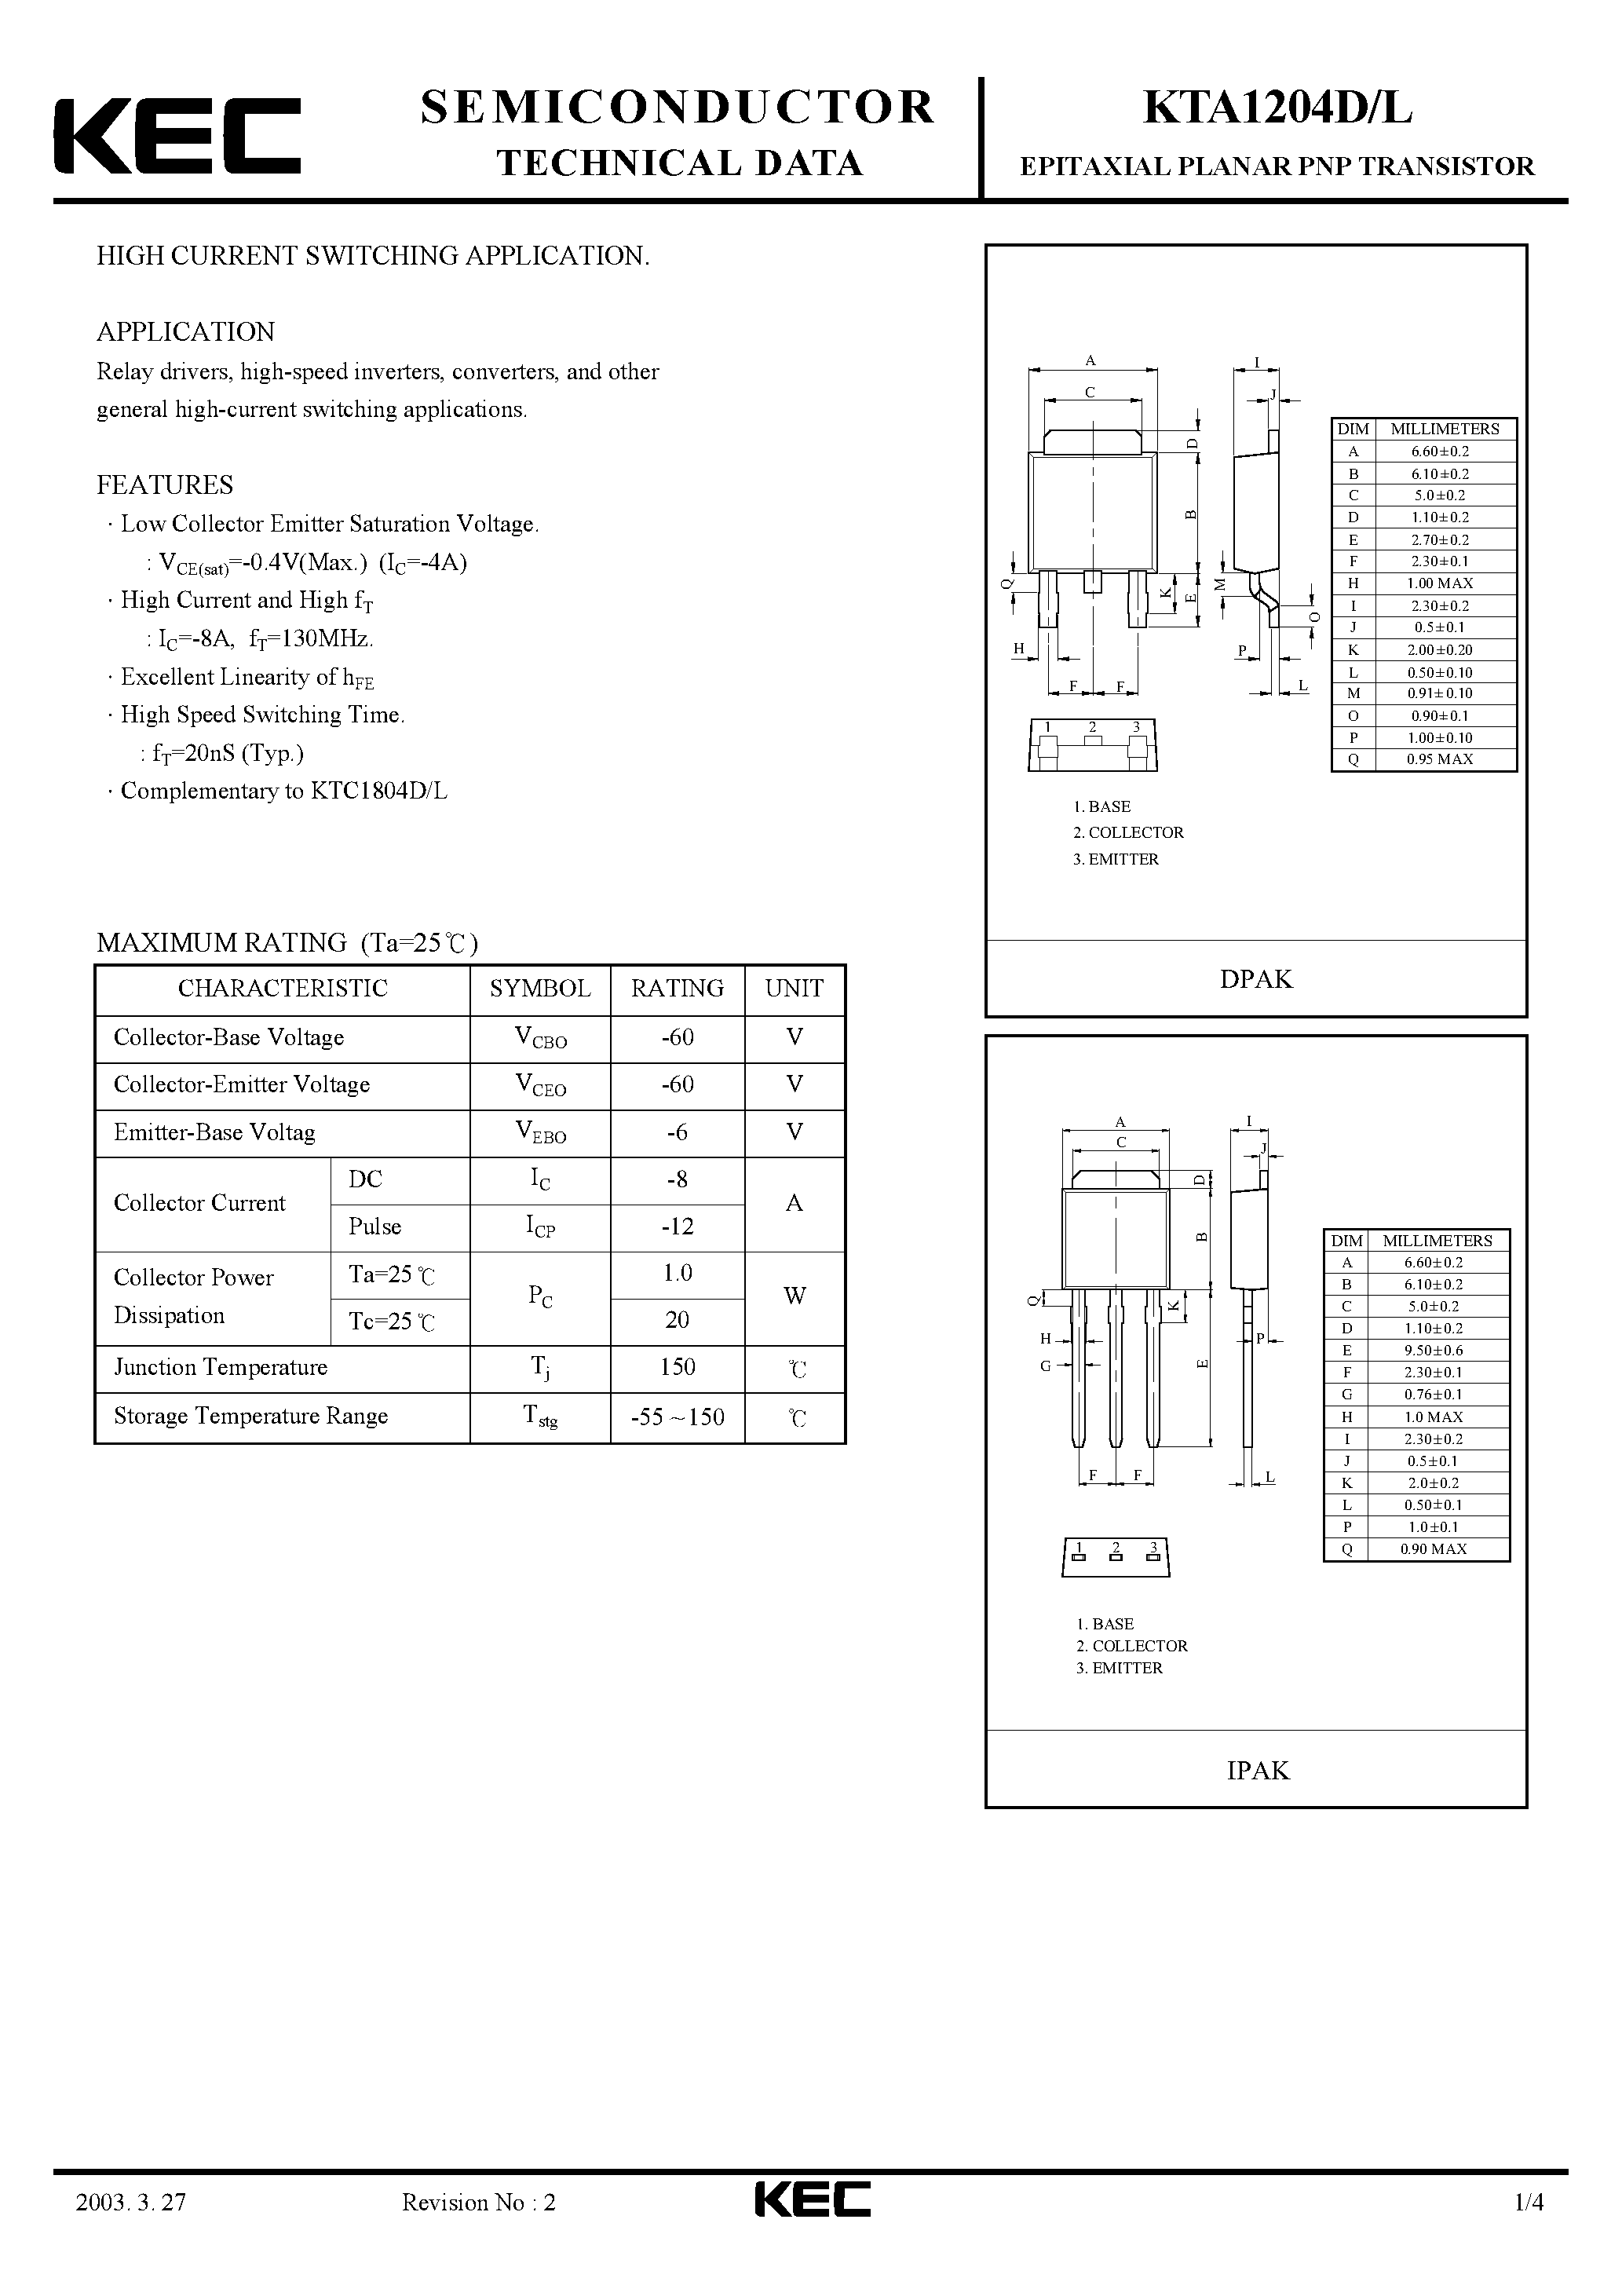 Datasheet KTA1204D - EPITAXIAL PLANAR PNP TRANSISTOR (HIGH CURRENT SWITCHING) page 1